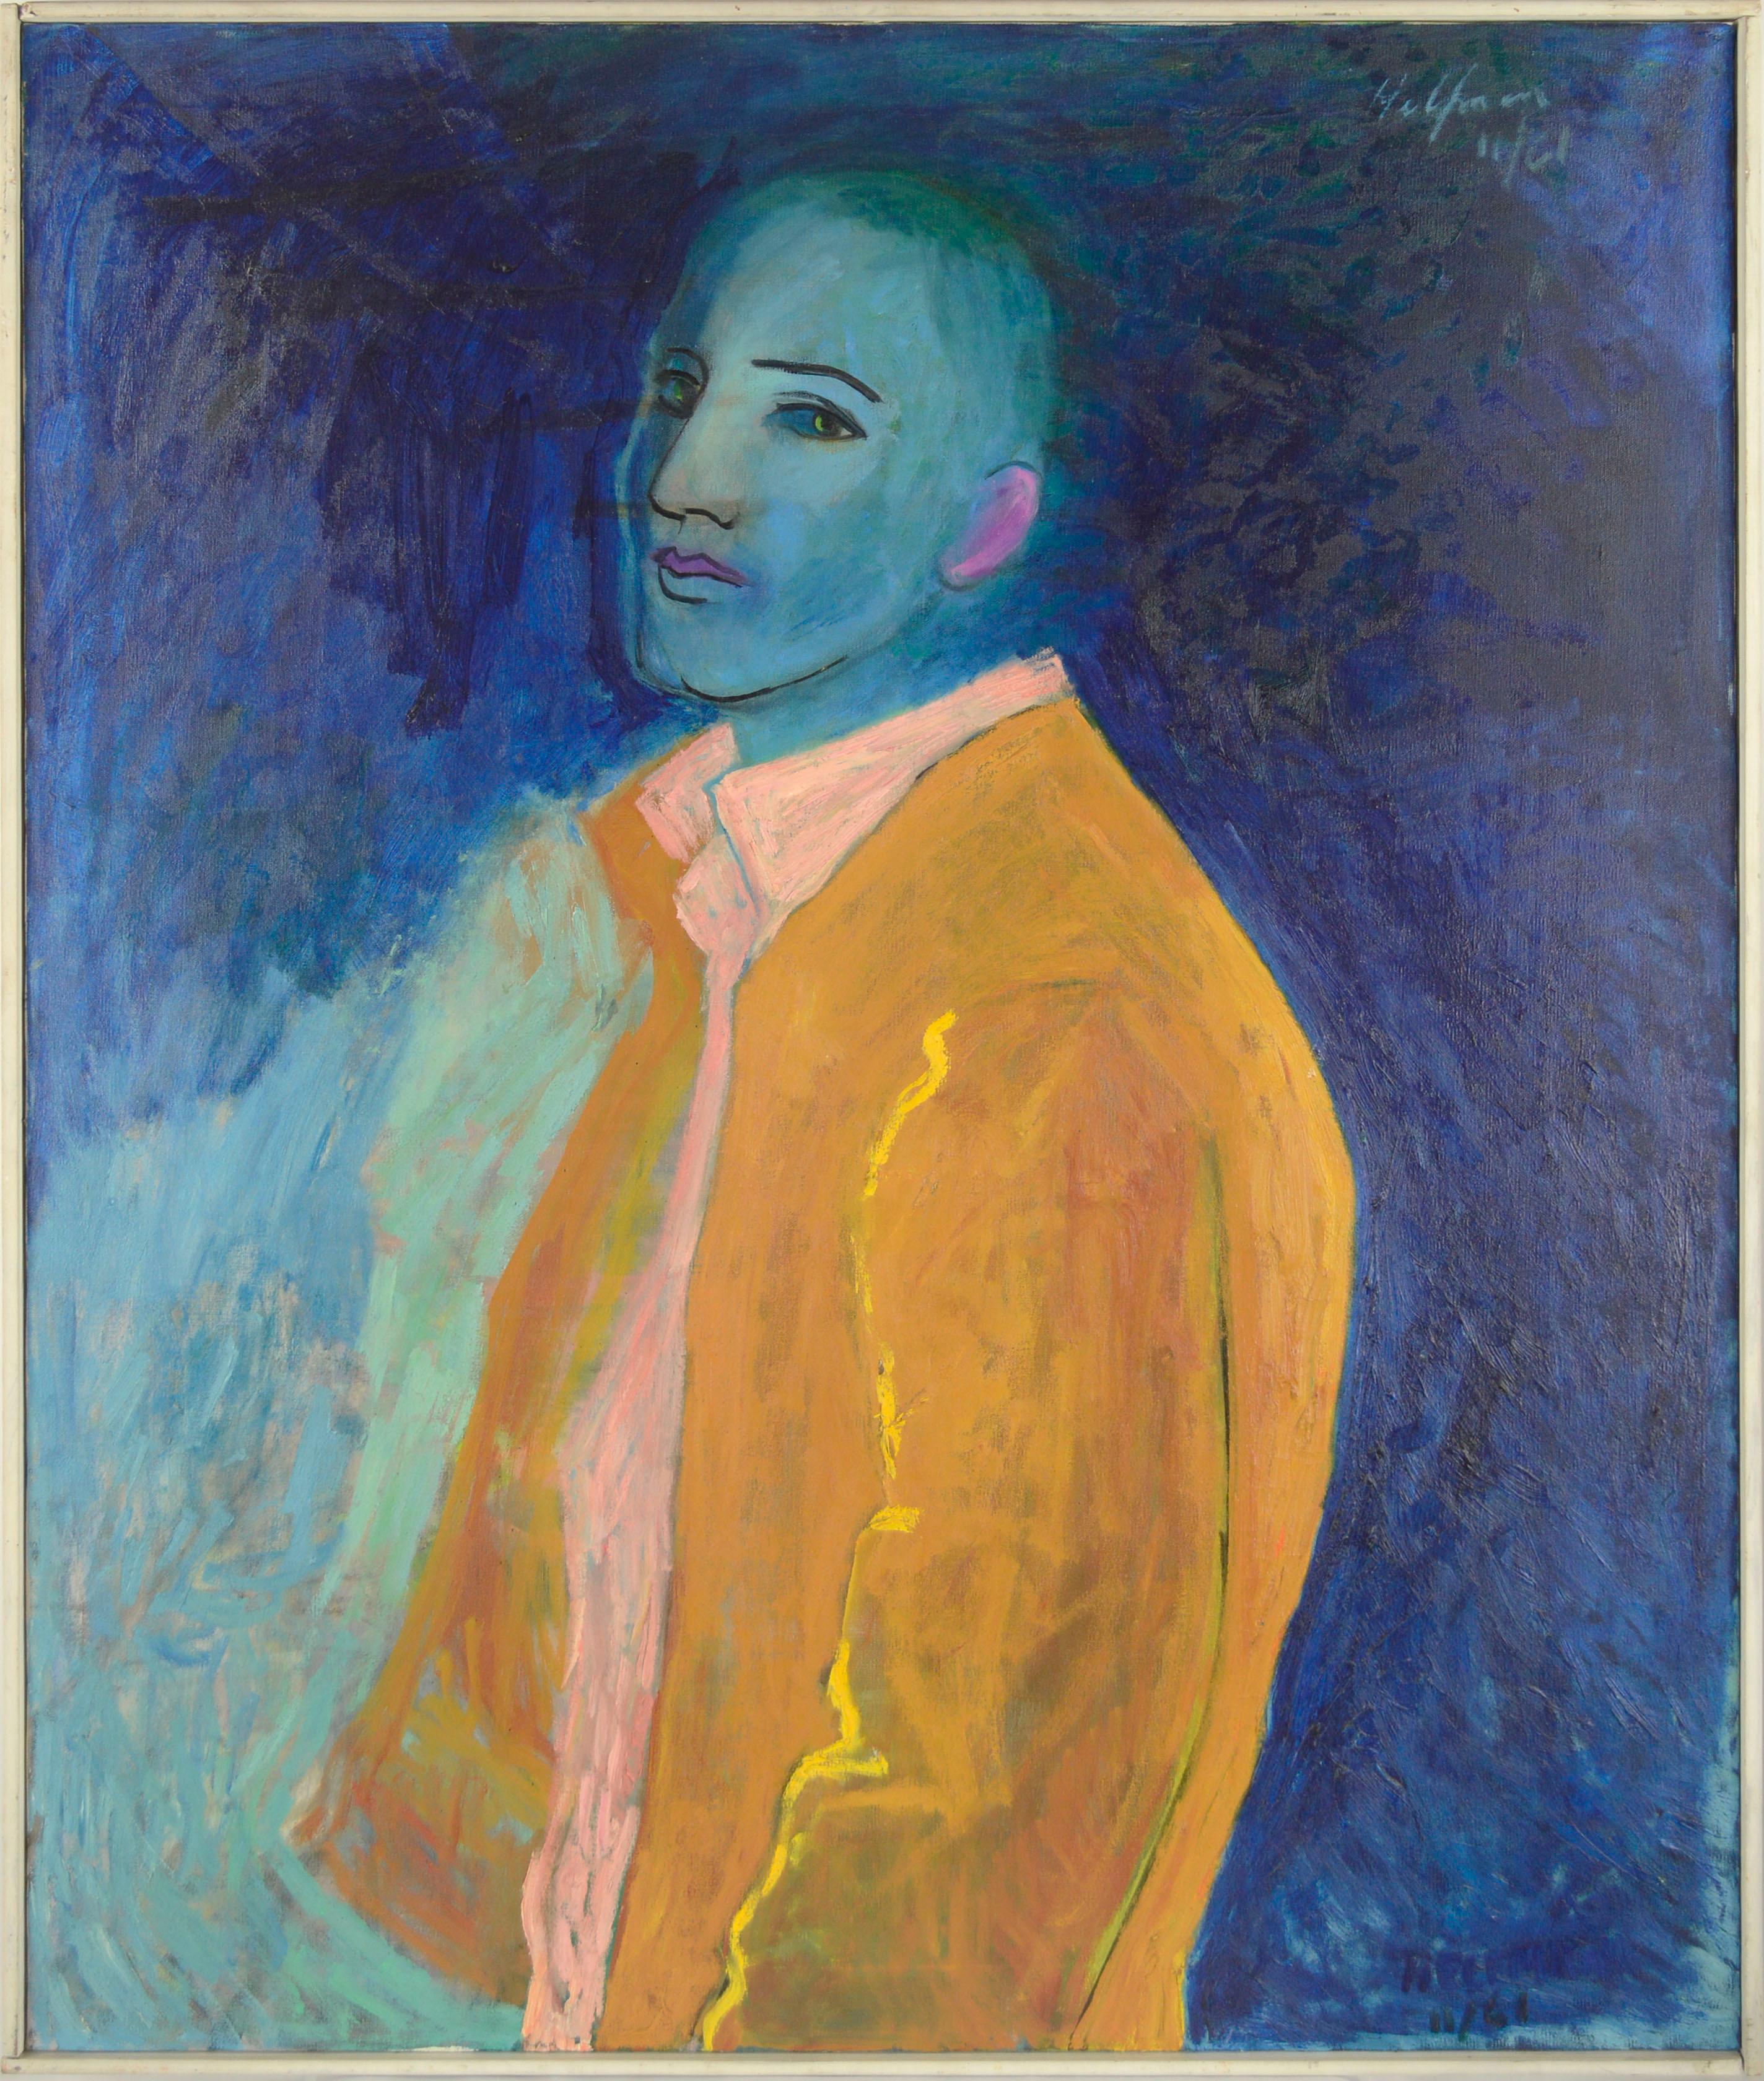 Sydney Helfman Portrait Painting - Mid Century Fauvist Self Portrait in Blue and Yellow